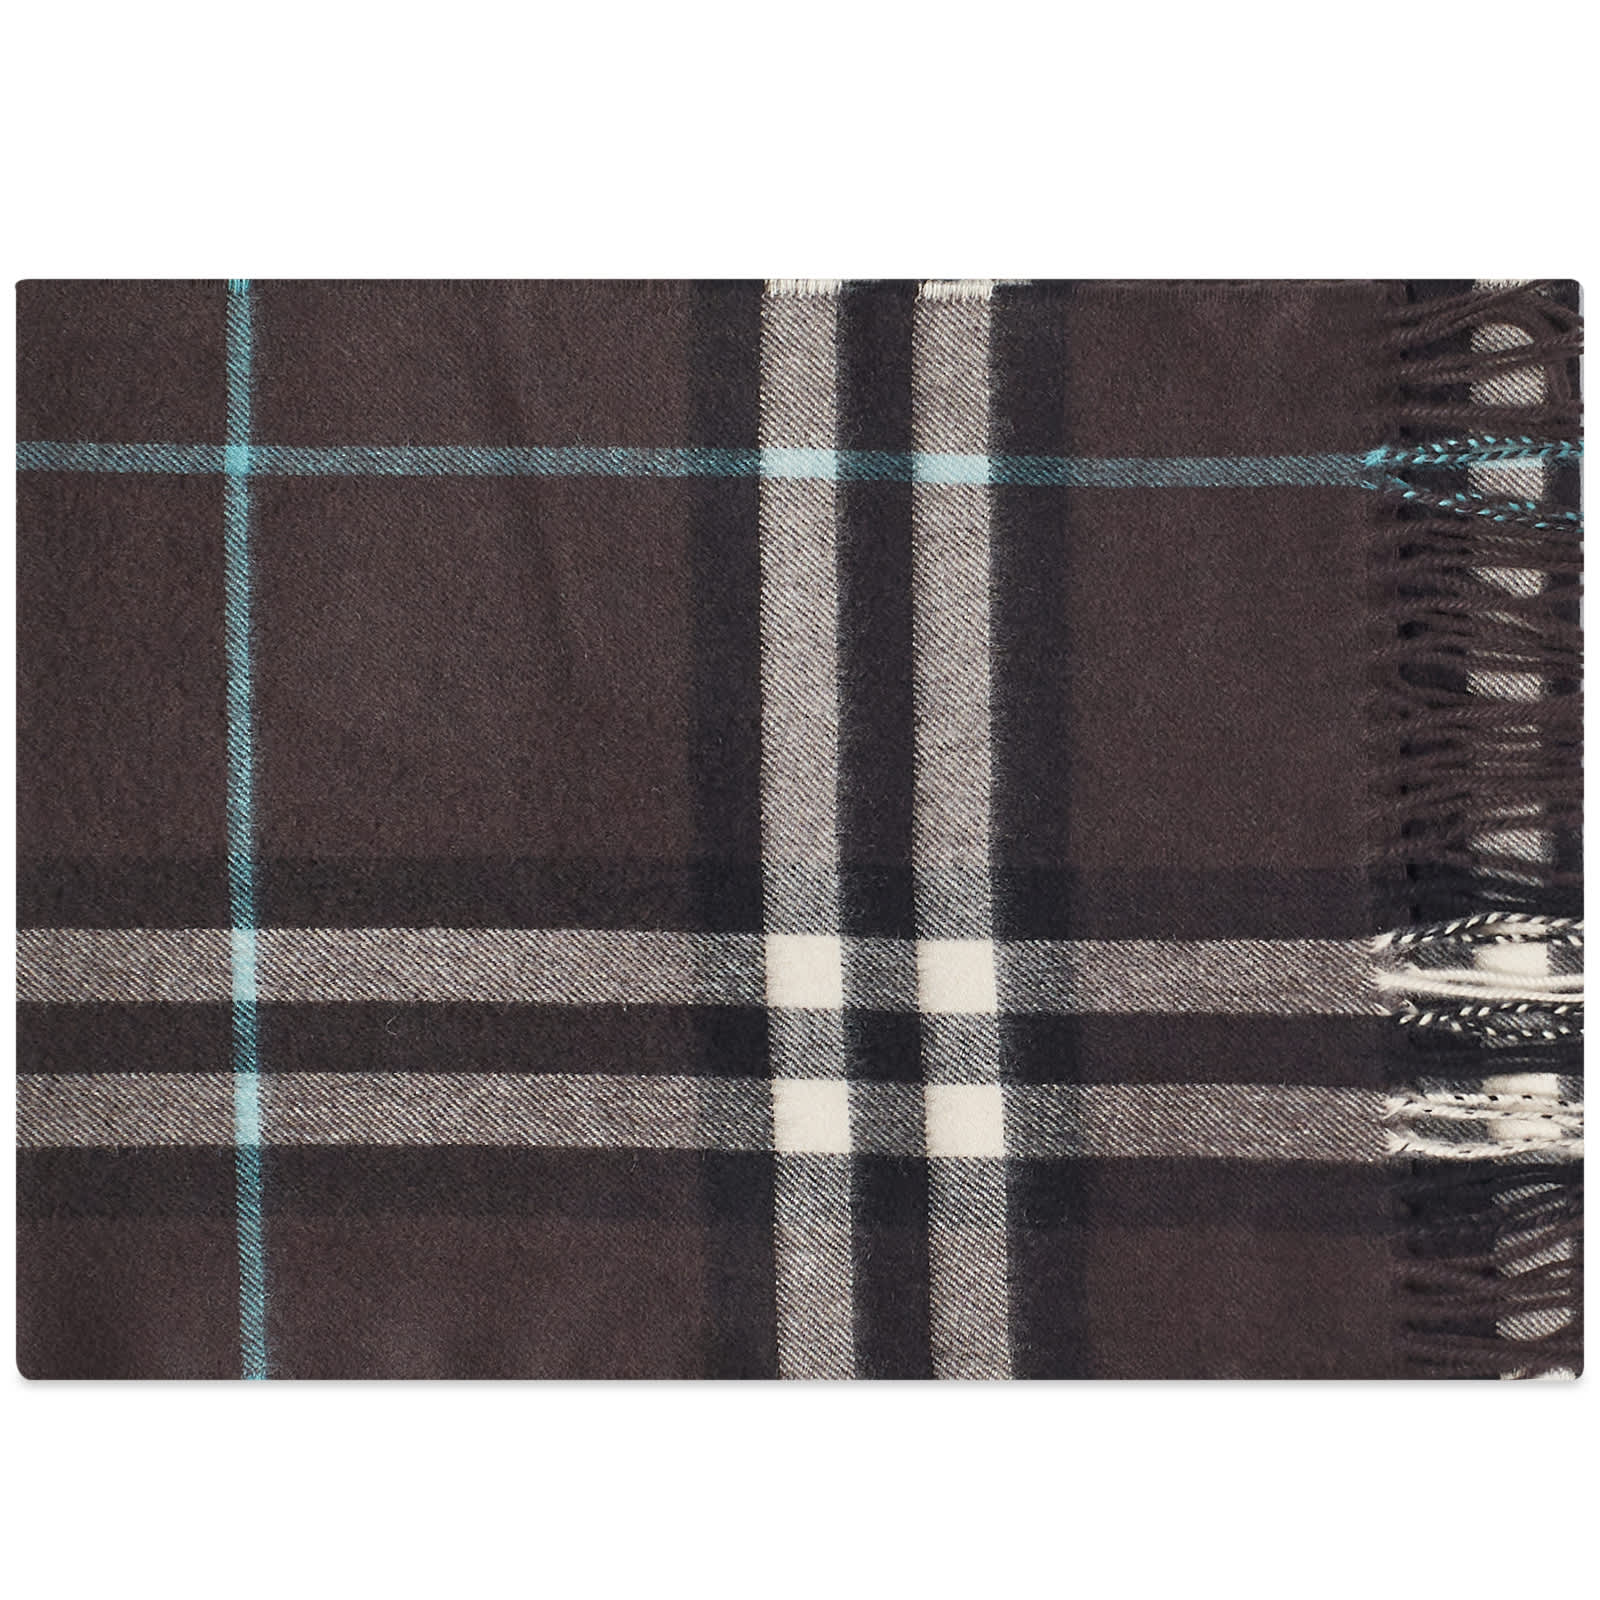 Шарф Burberry Giant Check Cashmere, цвет Otter шарф burberry check wool кремовый